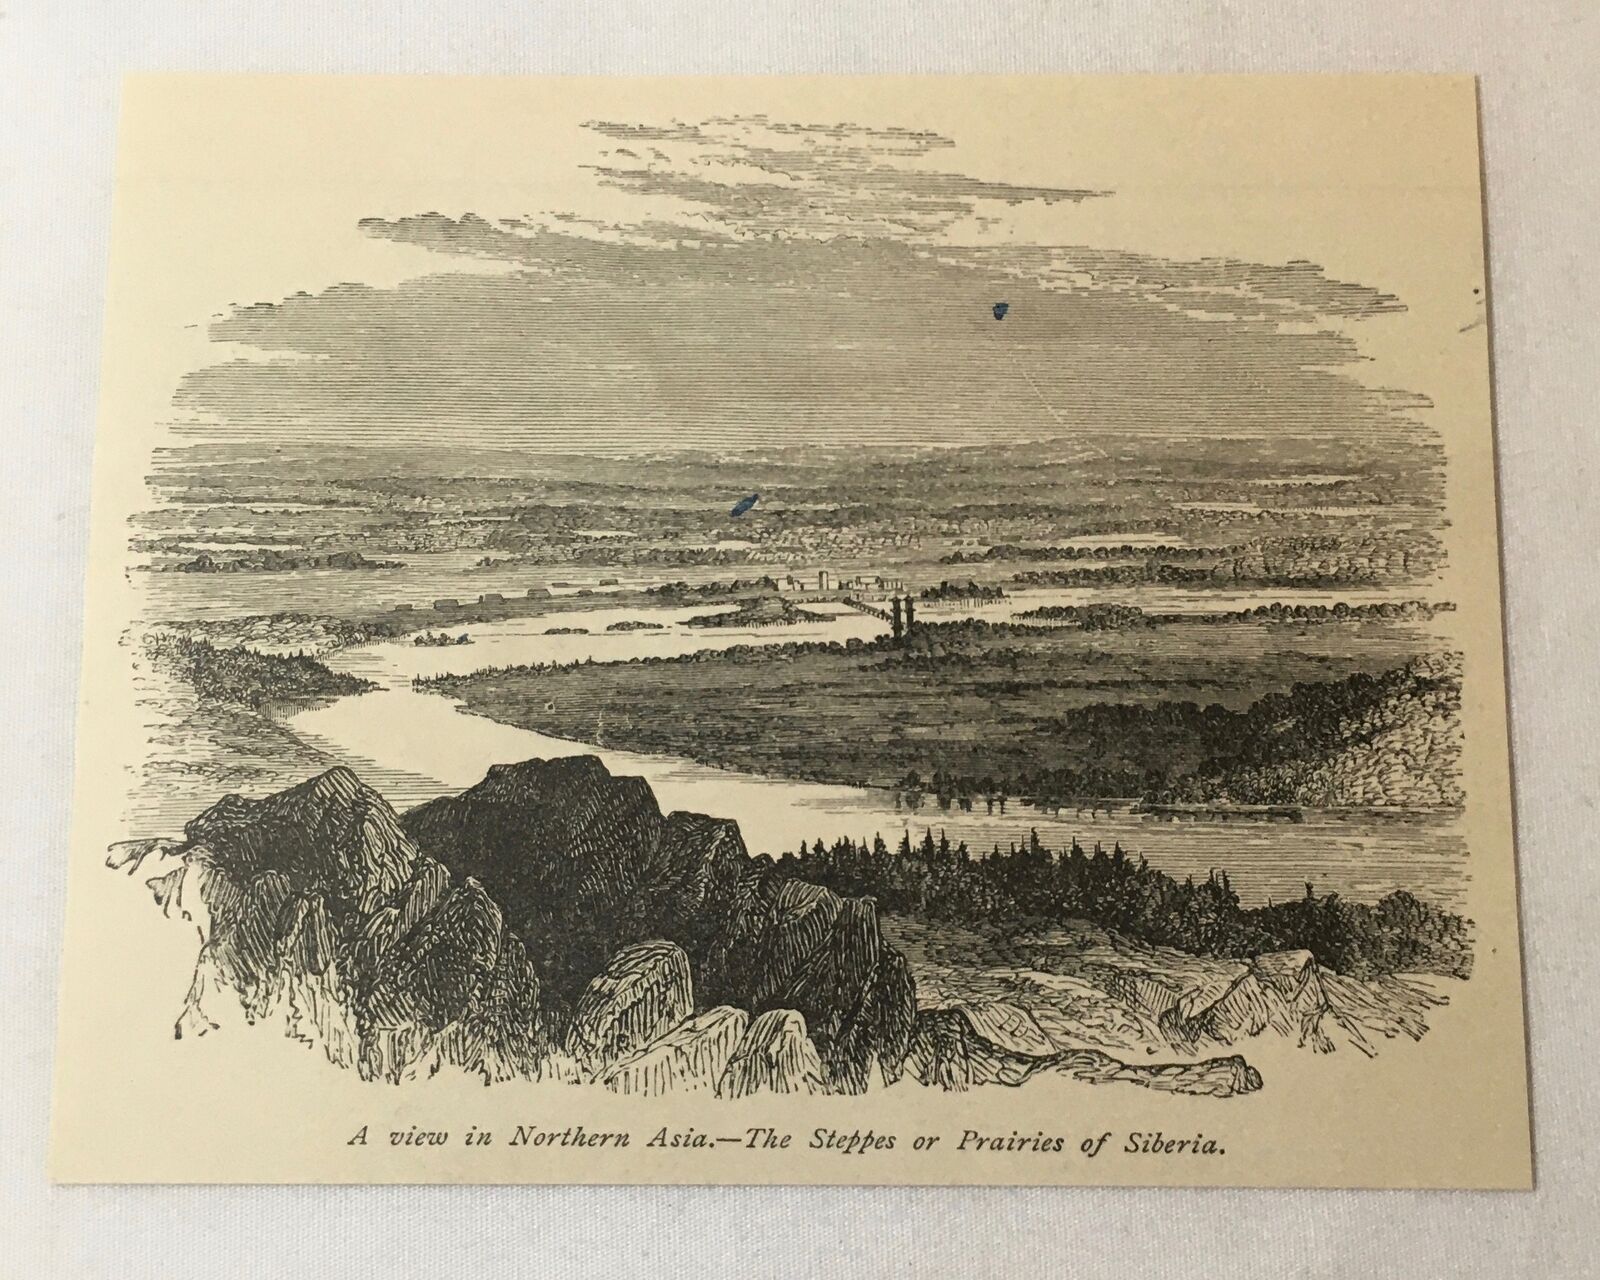 1873 book print ~  A VIEW IN NORTHERN ASIA - THE STEPPES OF SIBERIA